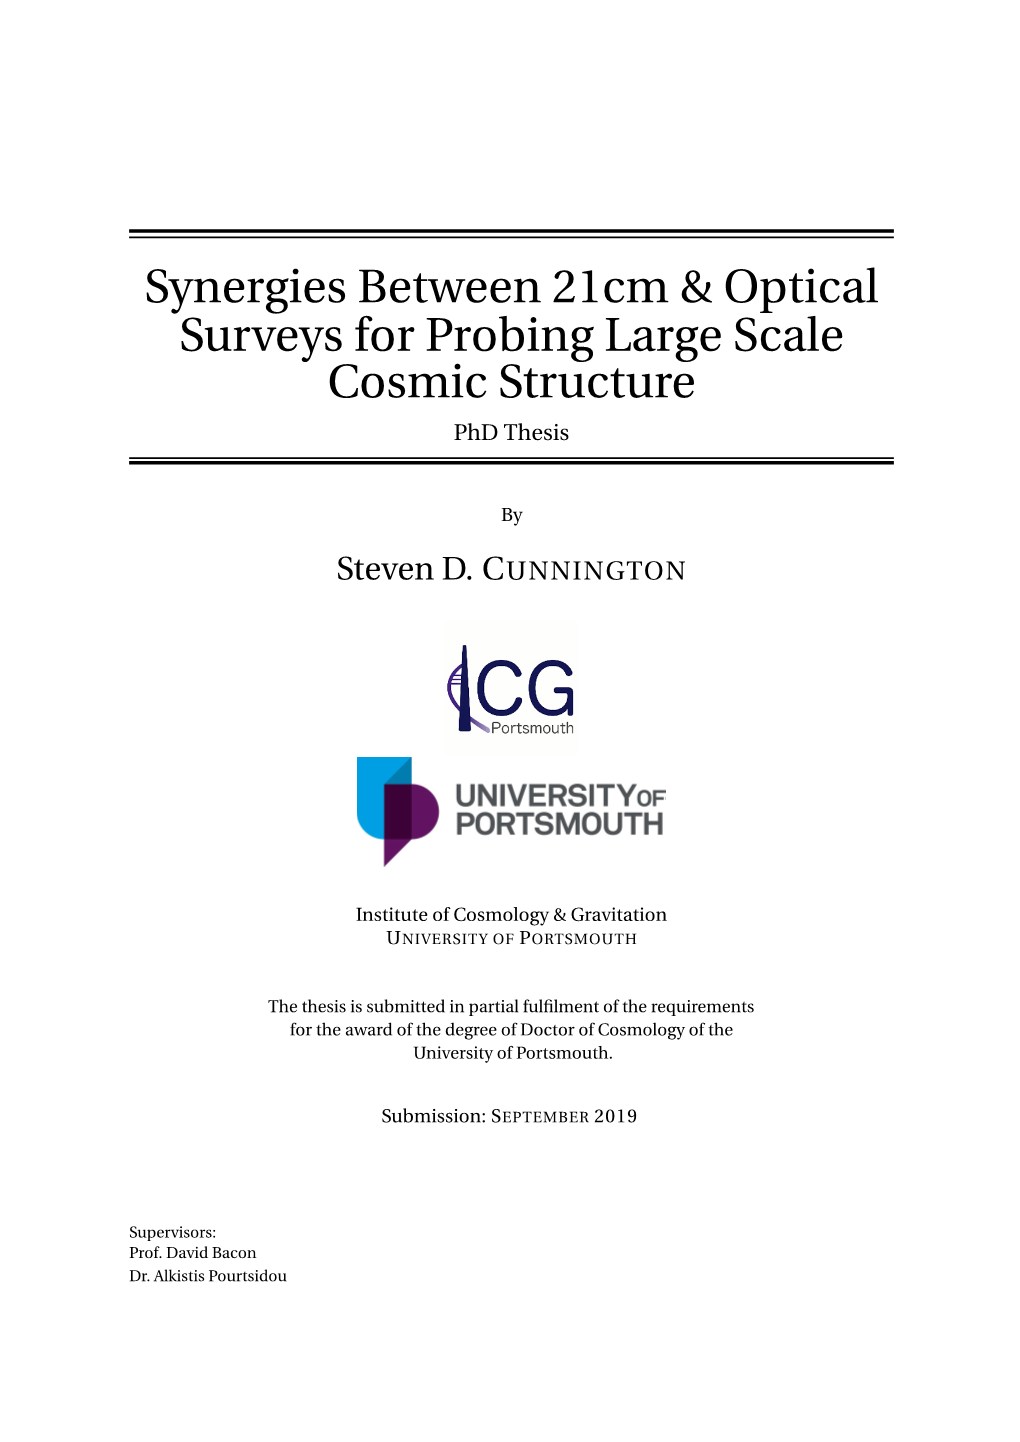 Synergies Between 21Cm & Optical Surveys for Probing Large Scale Cosmic Structure